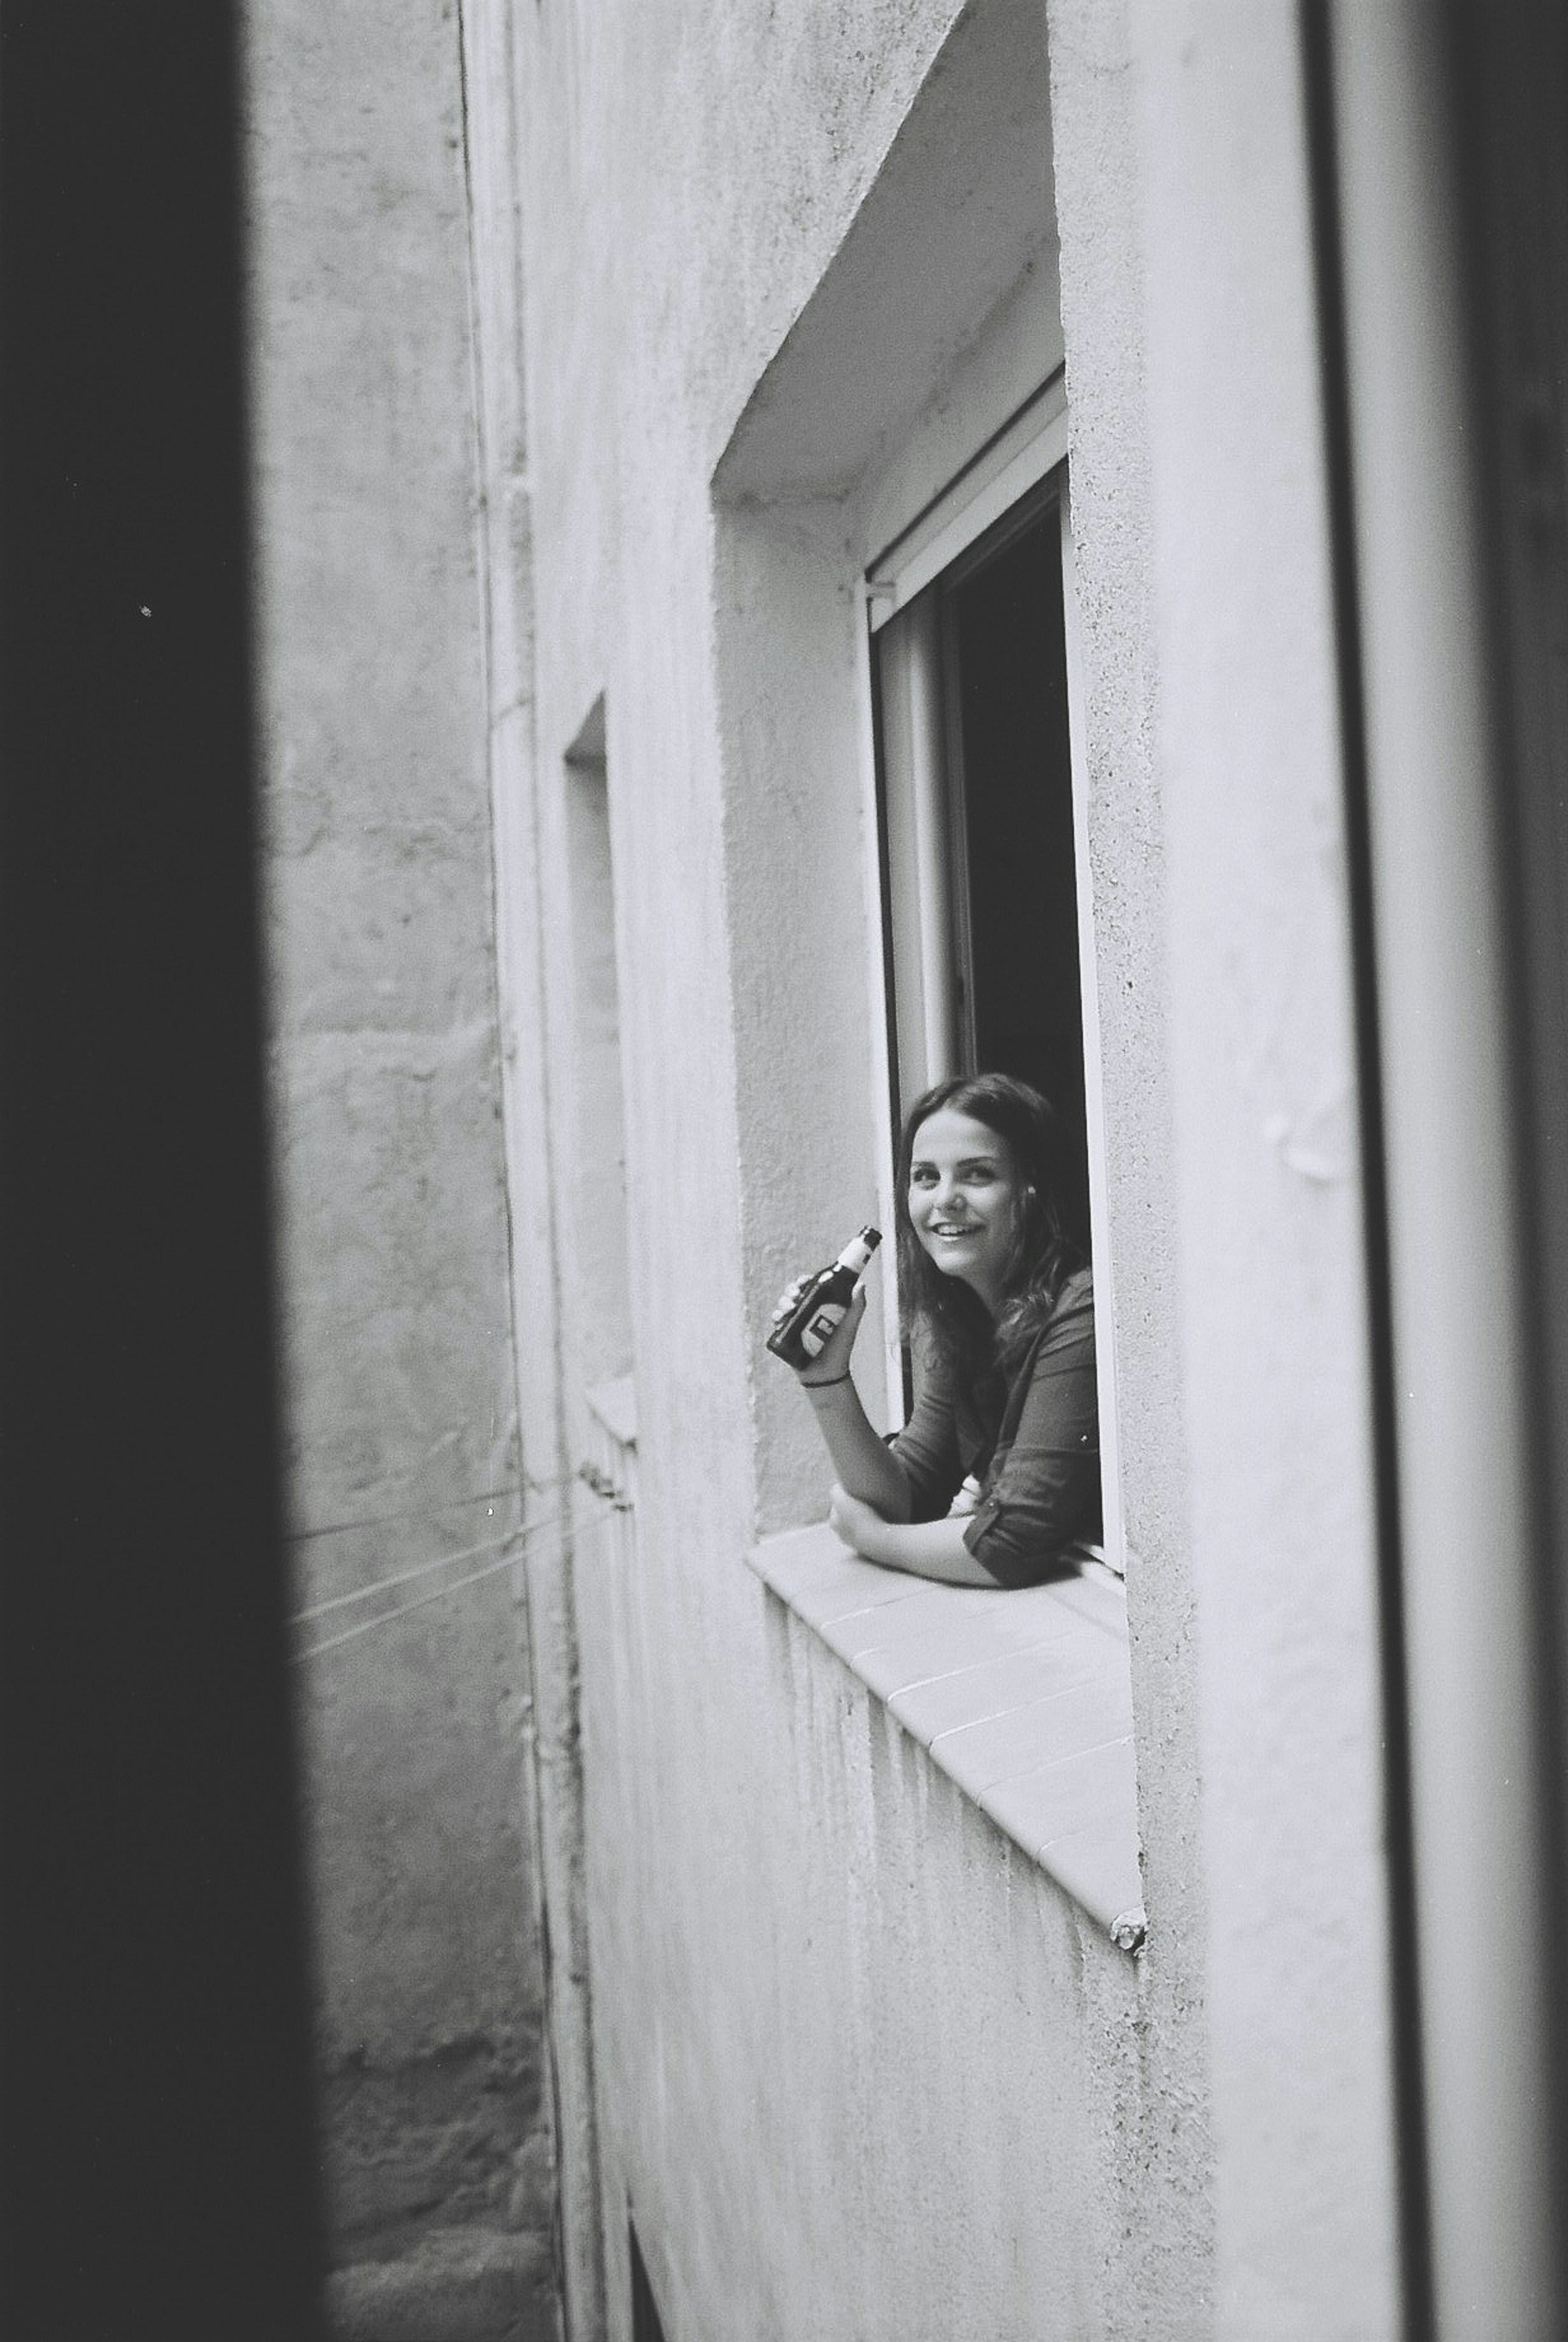 I was recently moved to Madrid and I was sharing a flat with some German people. From my room’s window I saw a girl drinking a beer and I started to talk with her. I found her so interesting, and although I had know her that moment, I asked her if I could take a photo.